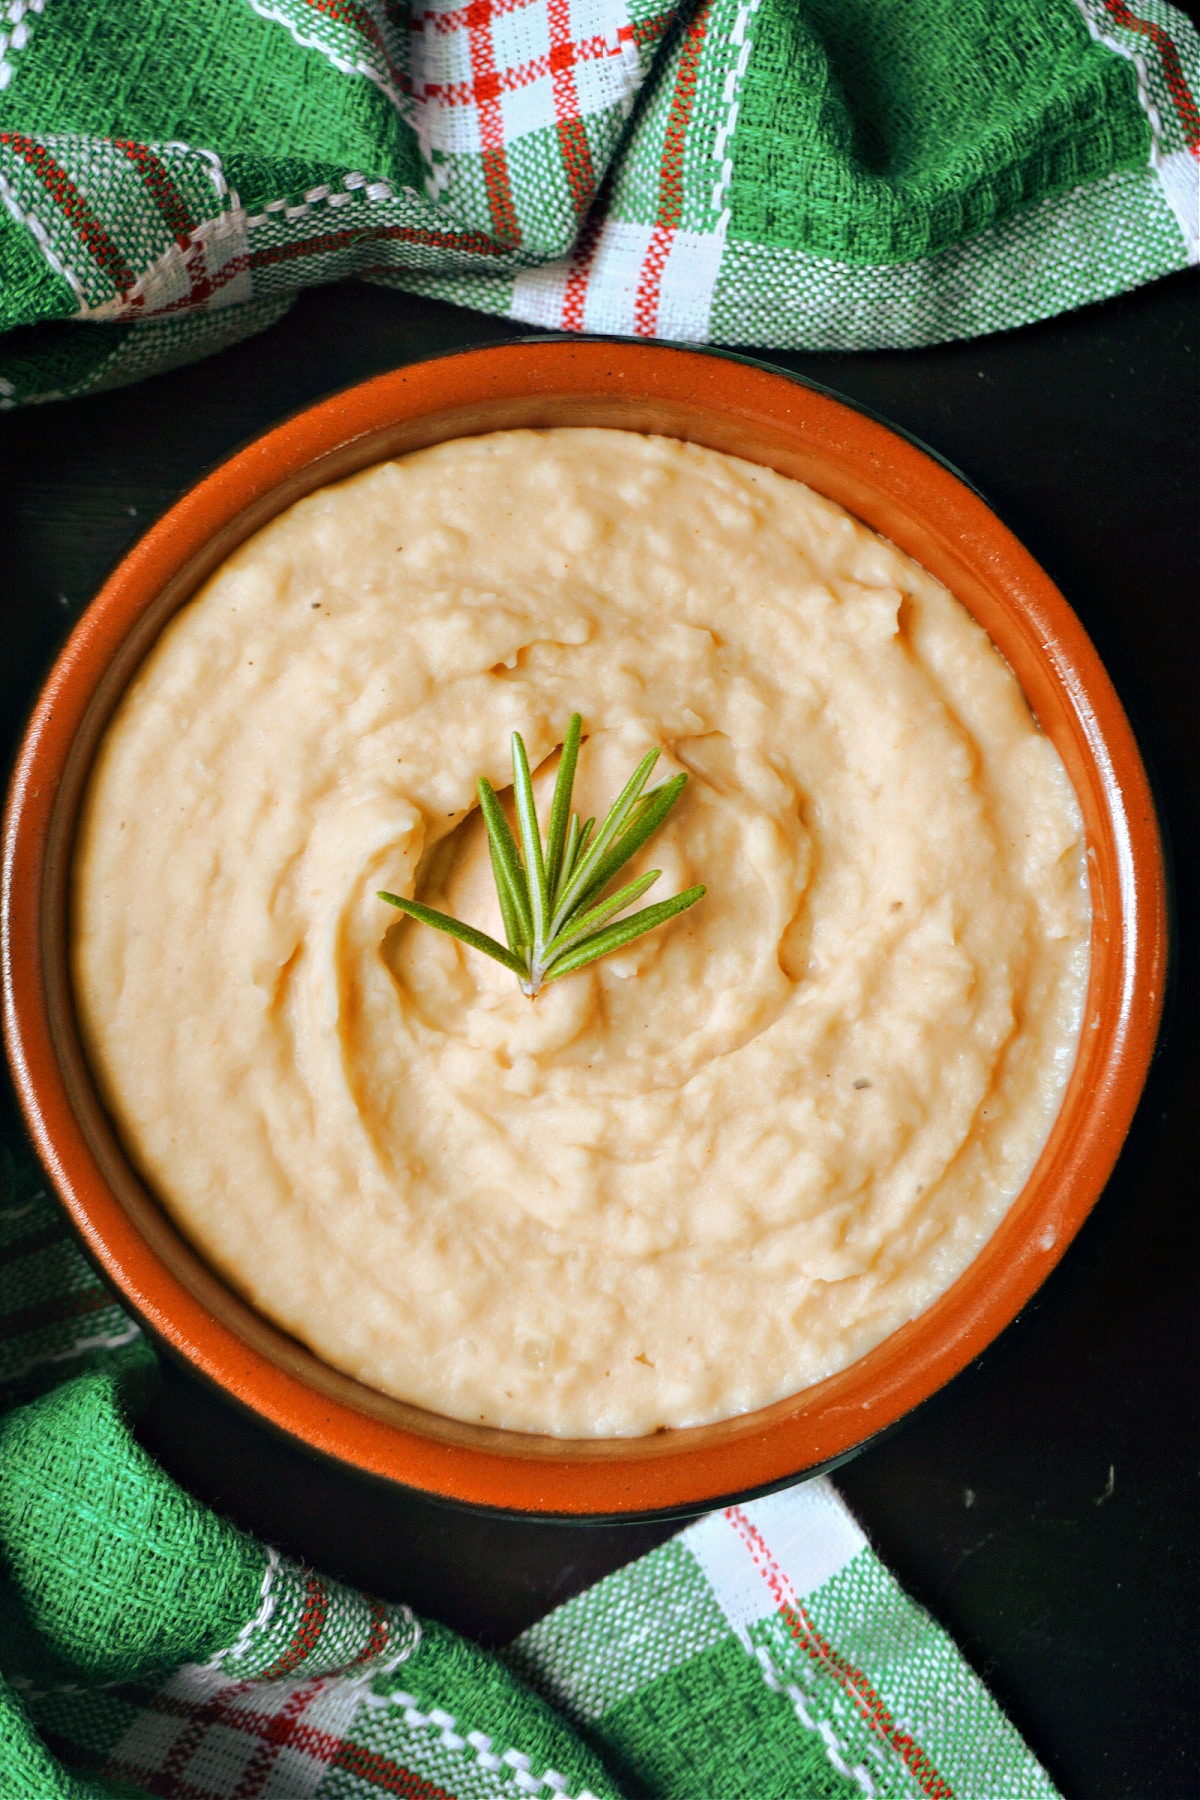 Overhead shoot of a bowl with bean mash garnish with a rosemary sprig